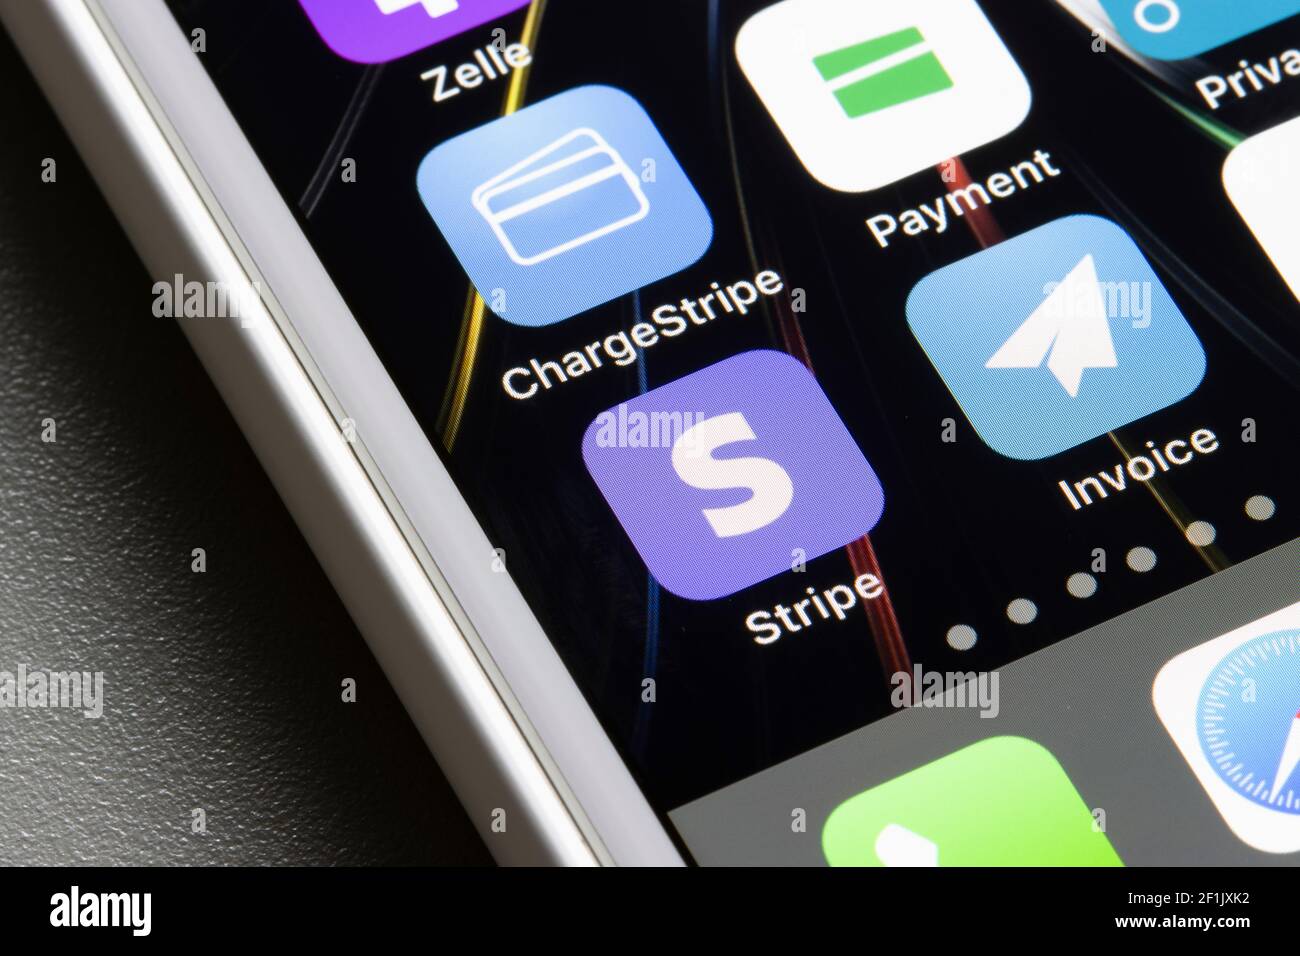 Stripe Dashboard app and three of the various Stripe partner apps - ChargeStripe, Stripe for Payment, Invoice for Stripe - are seen on an iPhone. Stock Photo